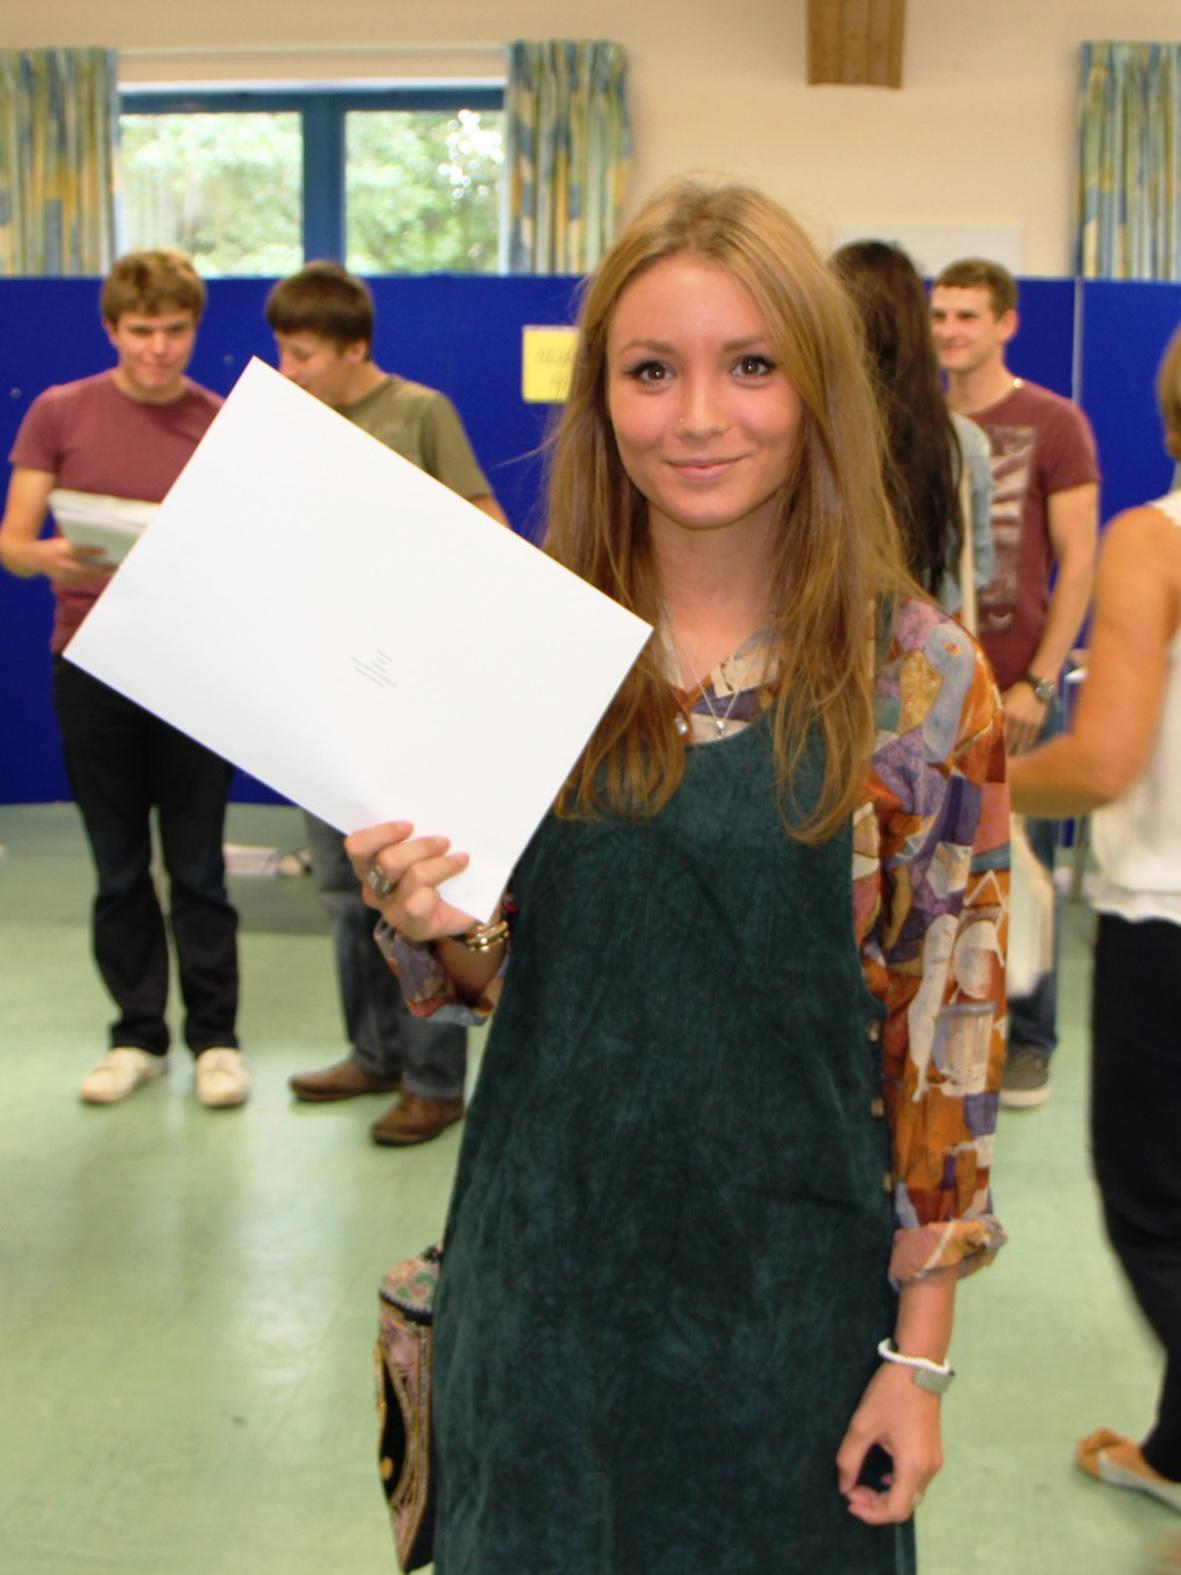 All our pictures from A-Level results day 2013. Burgate School.